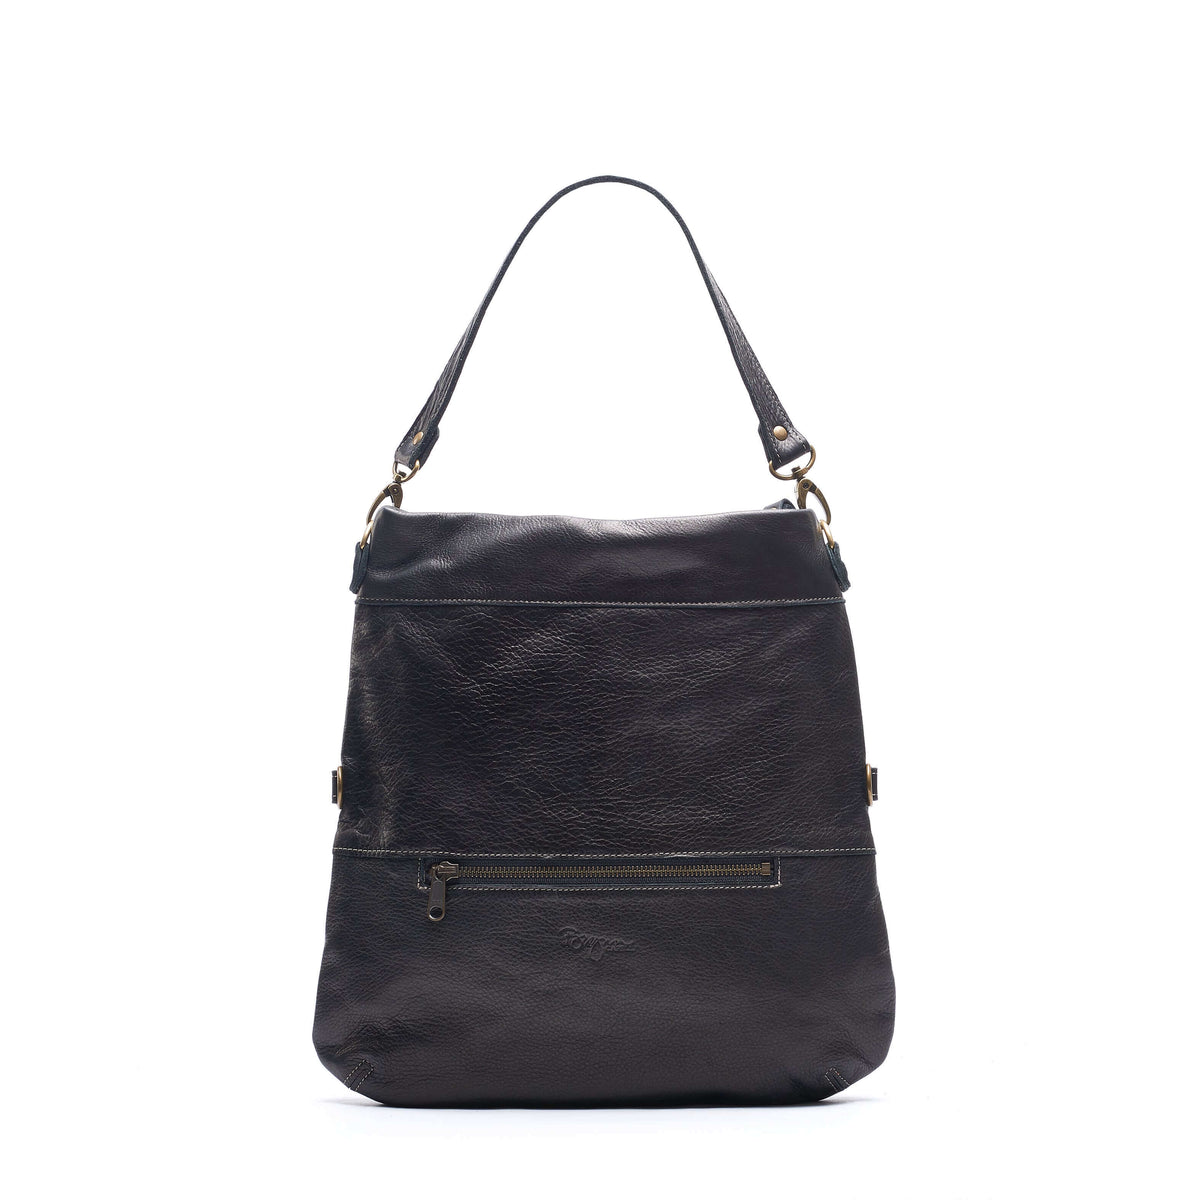 Black Leather Convertible Crossbody - made in USA, Brynn Capella $428 best sellers, Black, Pull-up leather